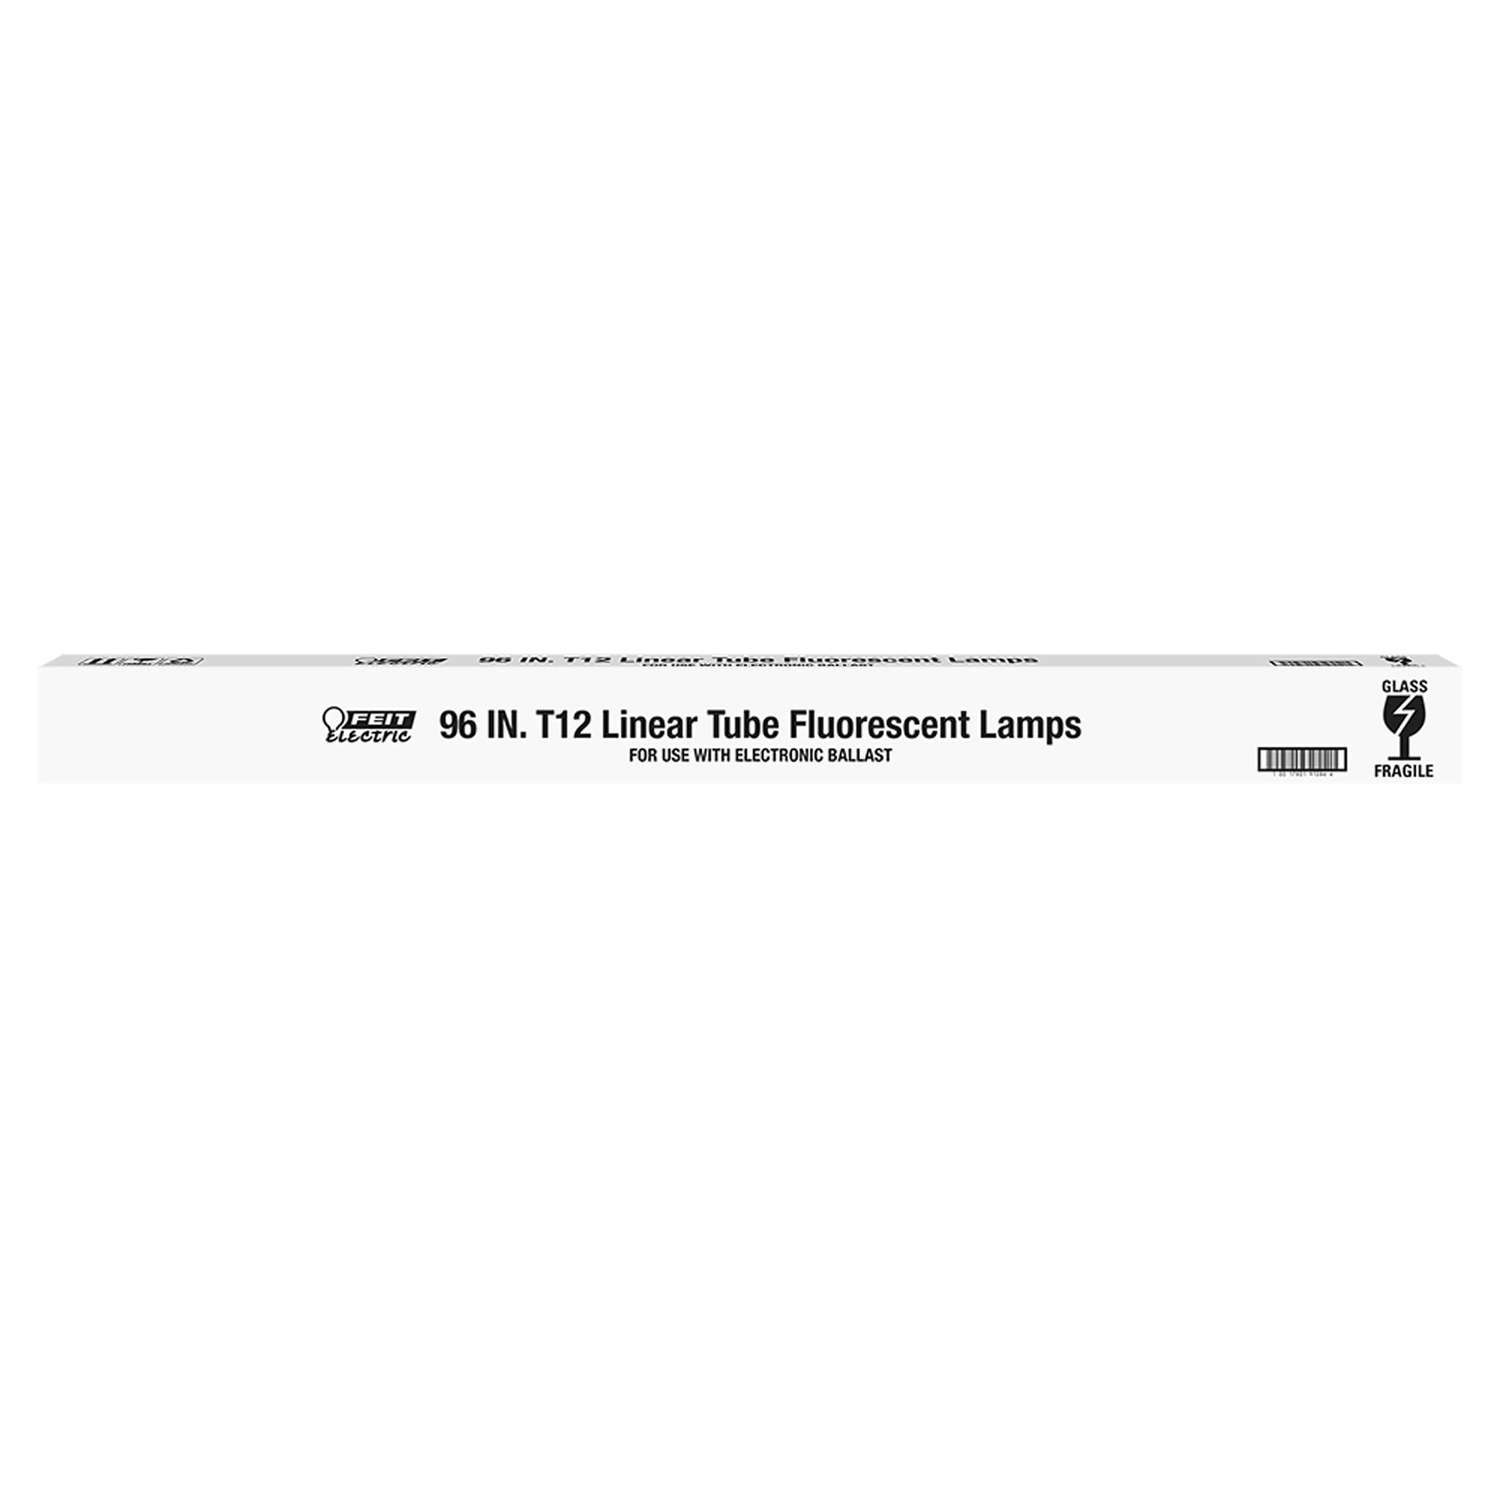 Details about   Duro-Test Corp 75W 96" T12 single pin 15 fluorescent bulbs per box. 